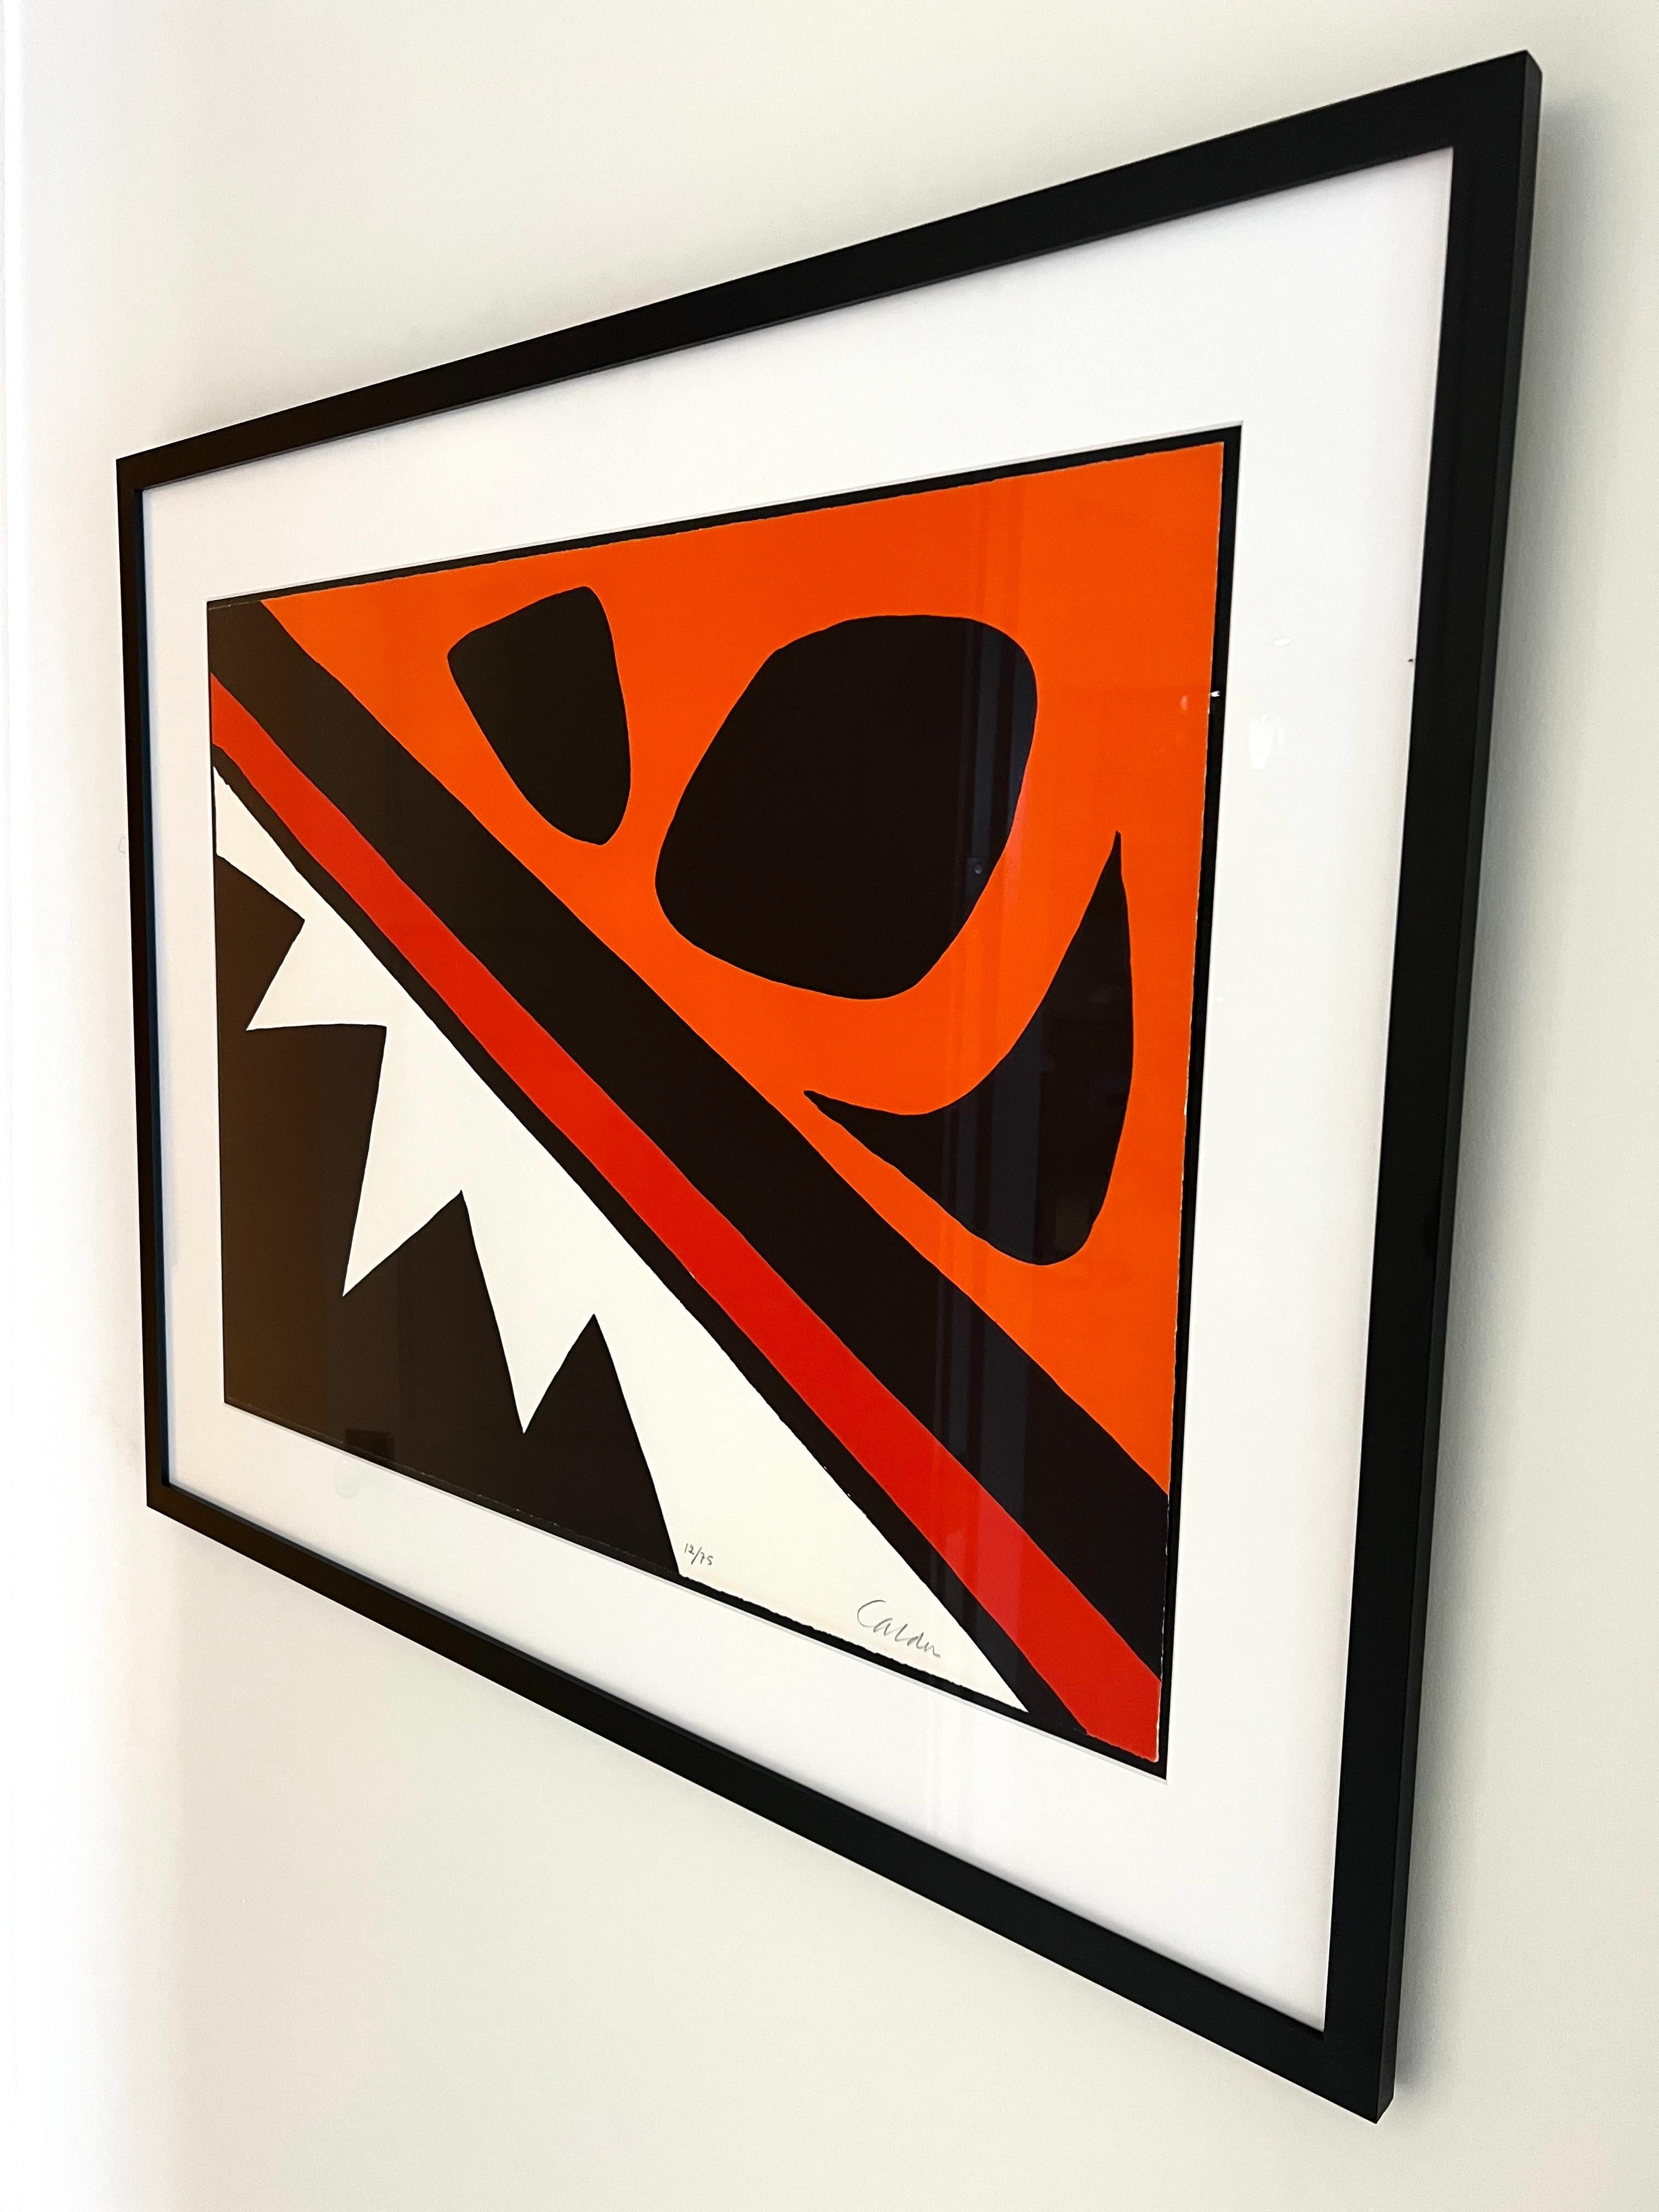 Original Hand Signed and Numbered Color Lithograph on Arches Wove Paper, No.12 out of Ed.75
22 × 30 in

Alexander Calder was born in Philadelphia in 1898 and died in New York in 1976.
Alexander Calder best known for his innovation of the mobile